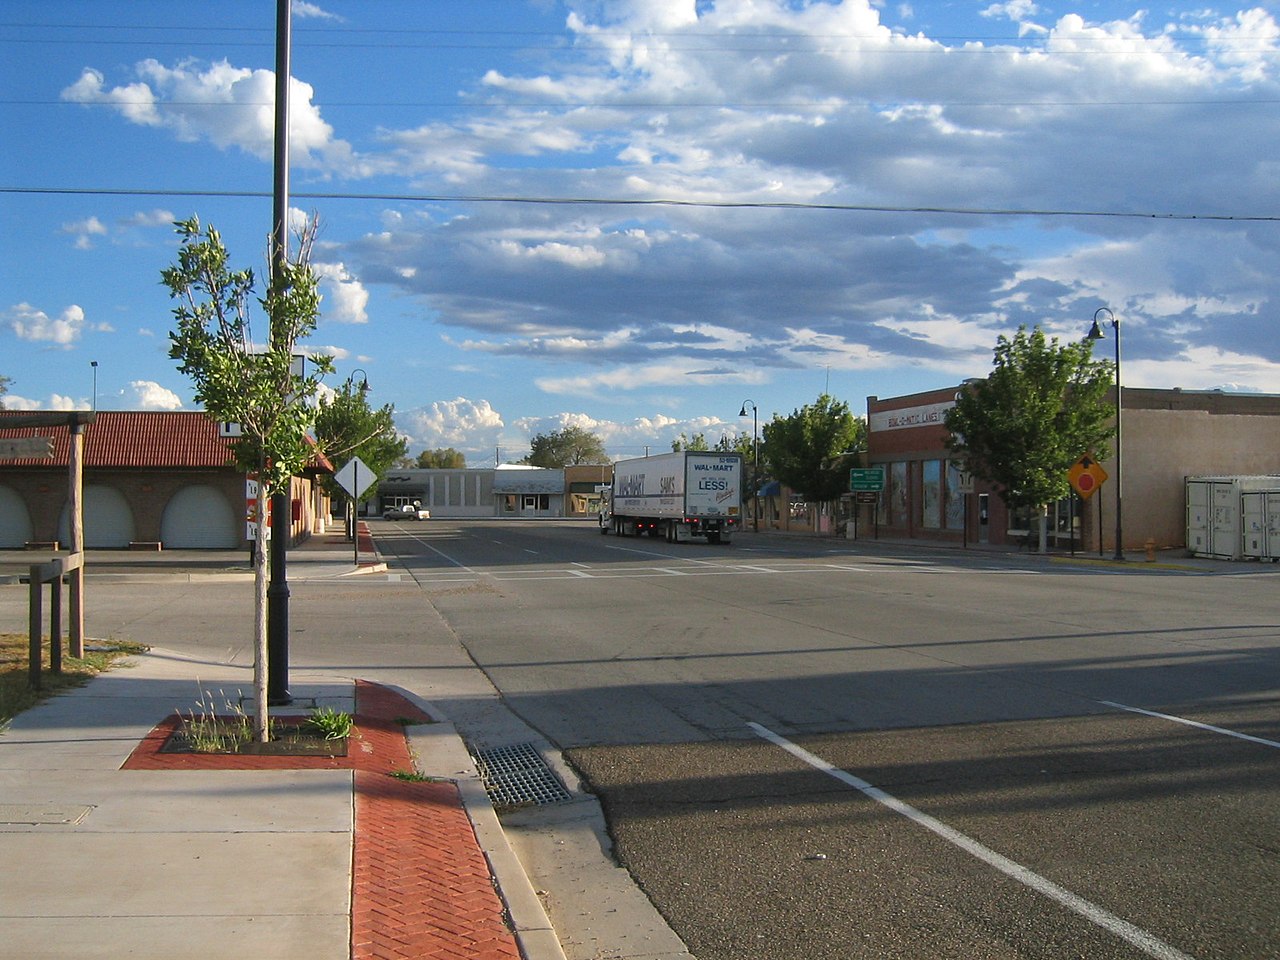 Haus and Hues in Fort Sumner